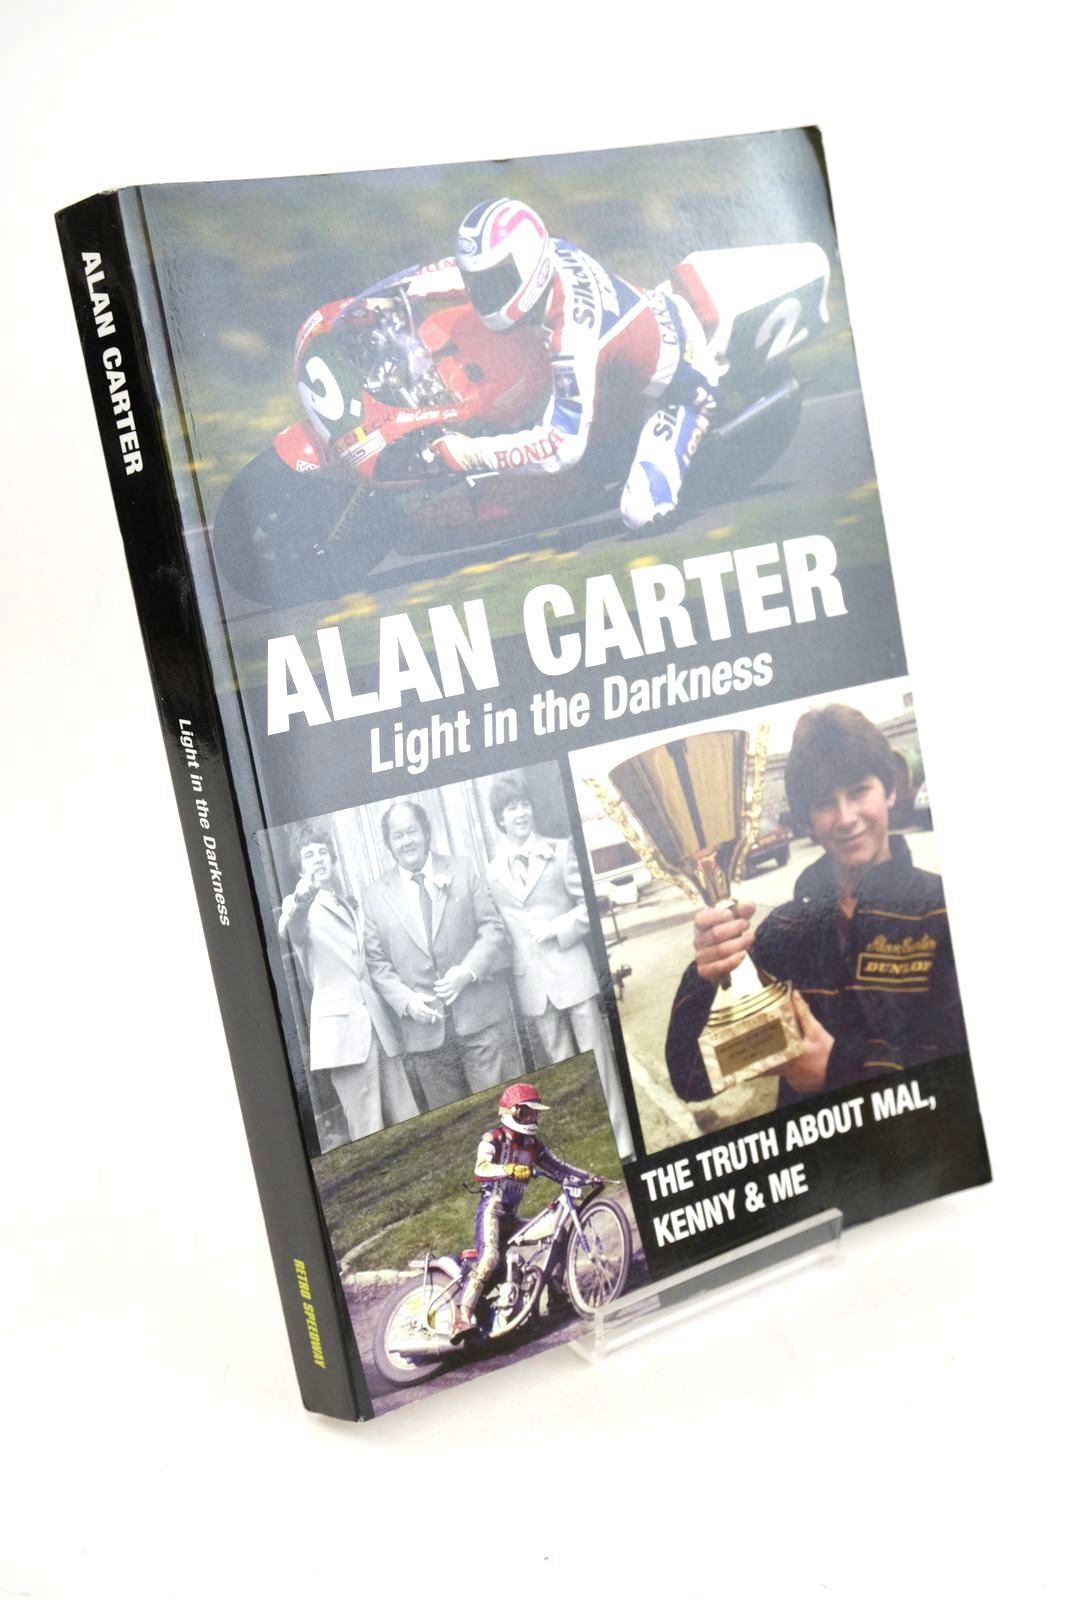 Photo of LIGHT IN THE DARKNESS THE TRUTH ABOUT MAL, KENNY &AMP; ME written by Carter, Alan published by Retro Speedway (STOCK CODE: 1327468)  for sale by Stella & Rose's Books